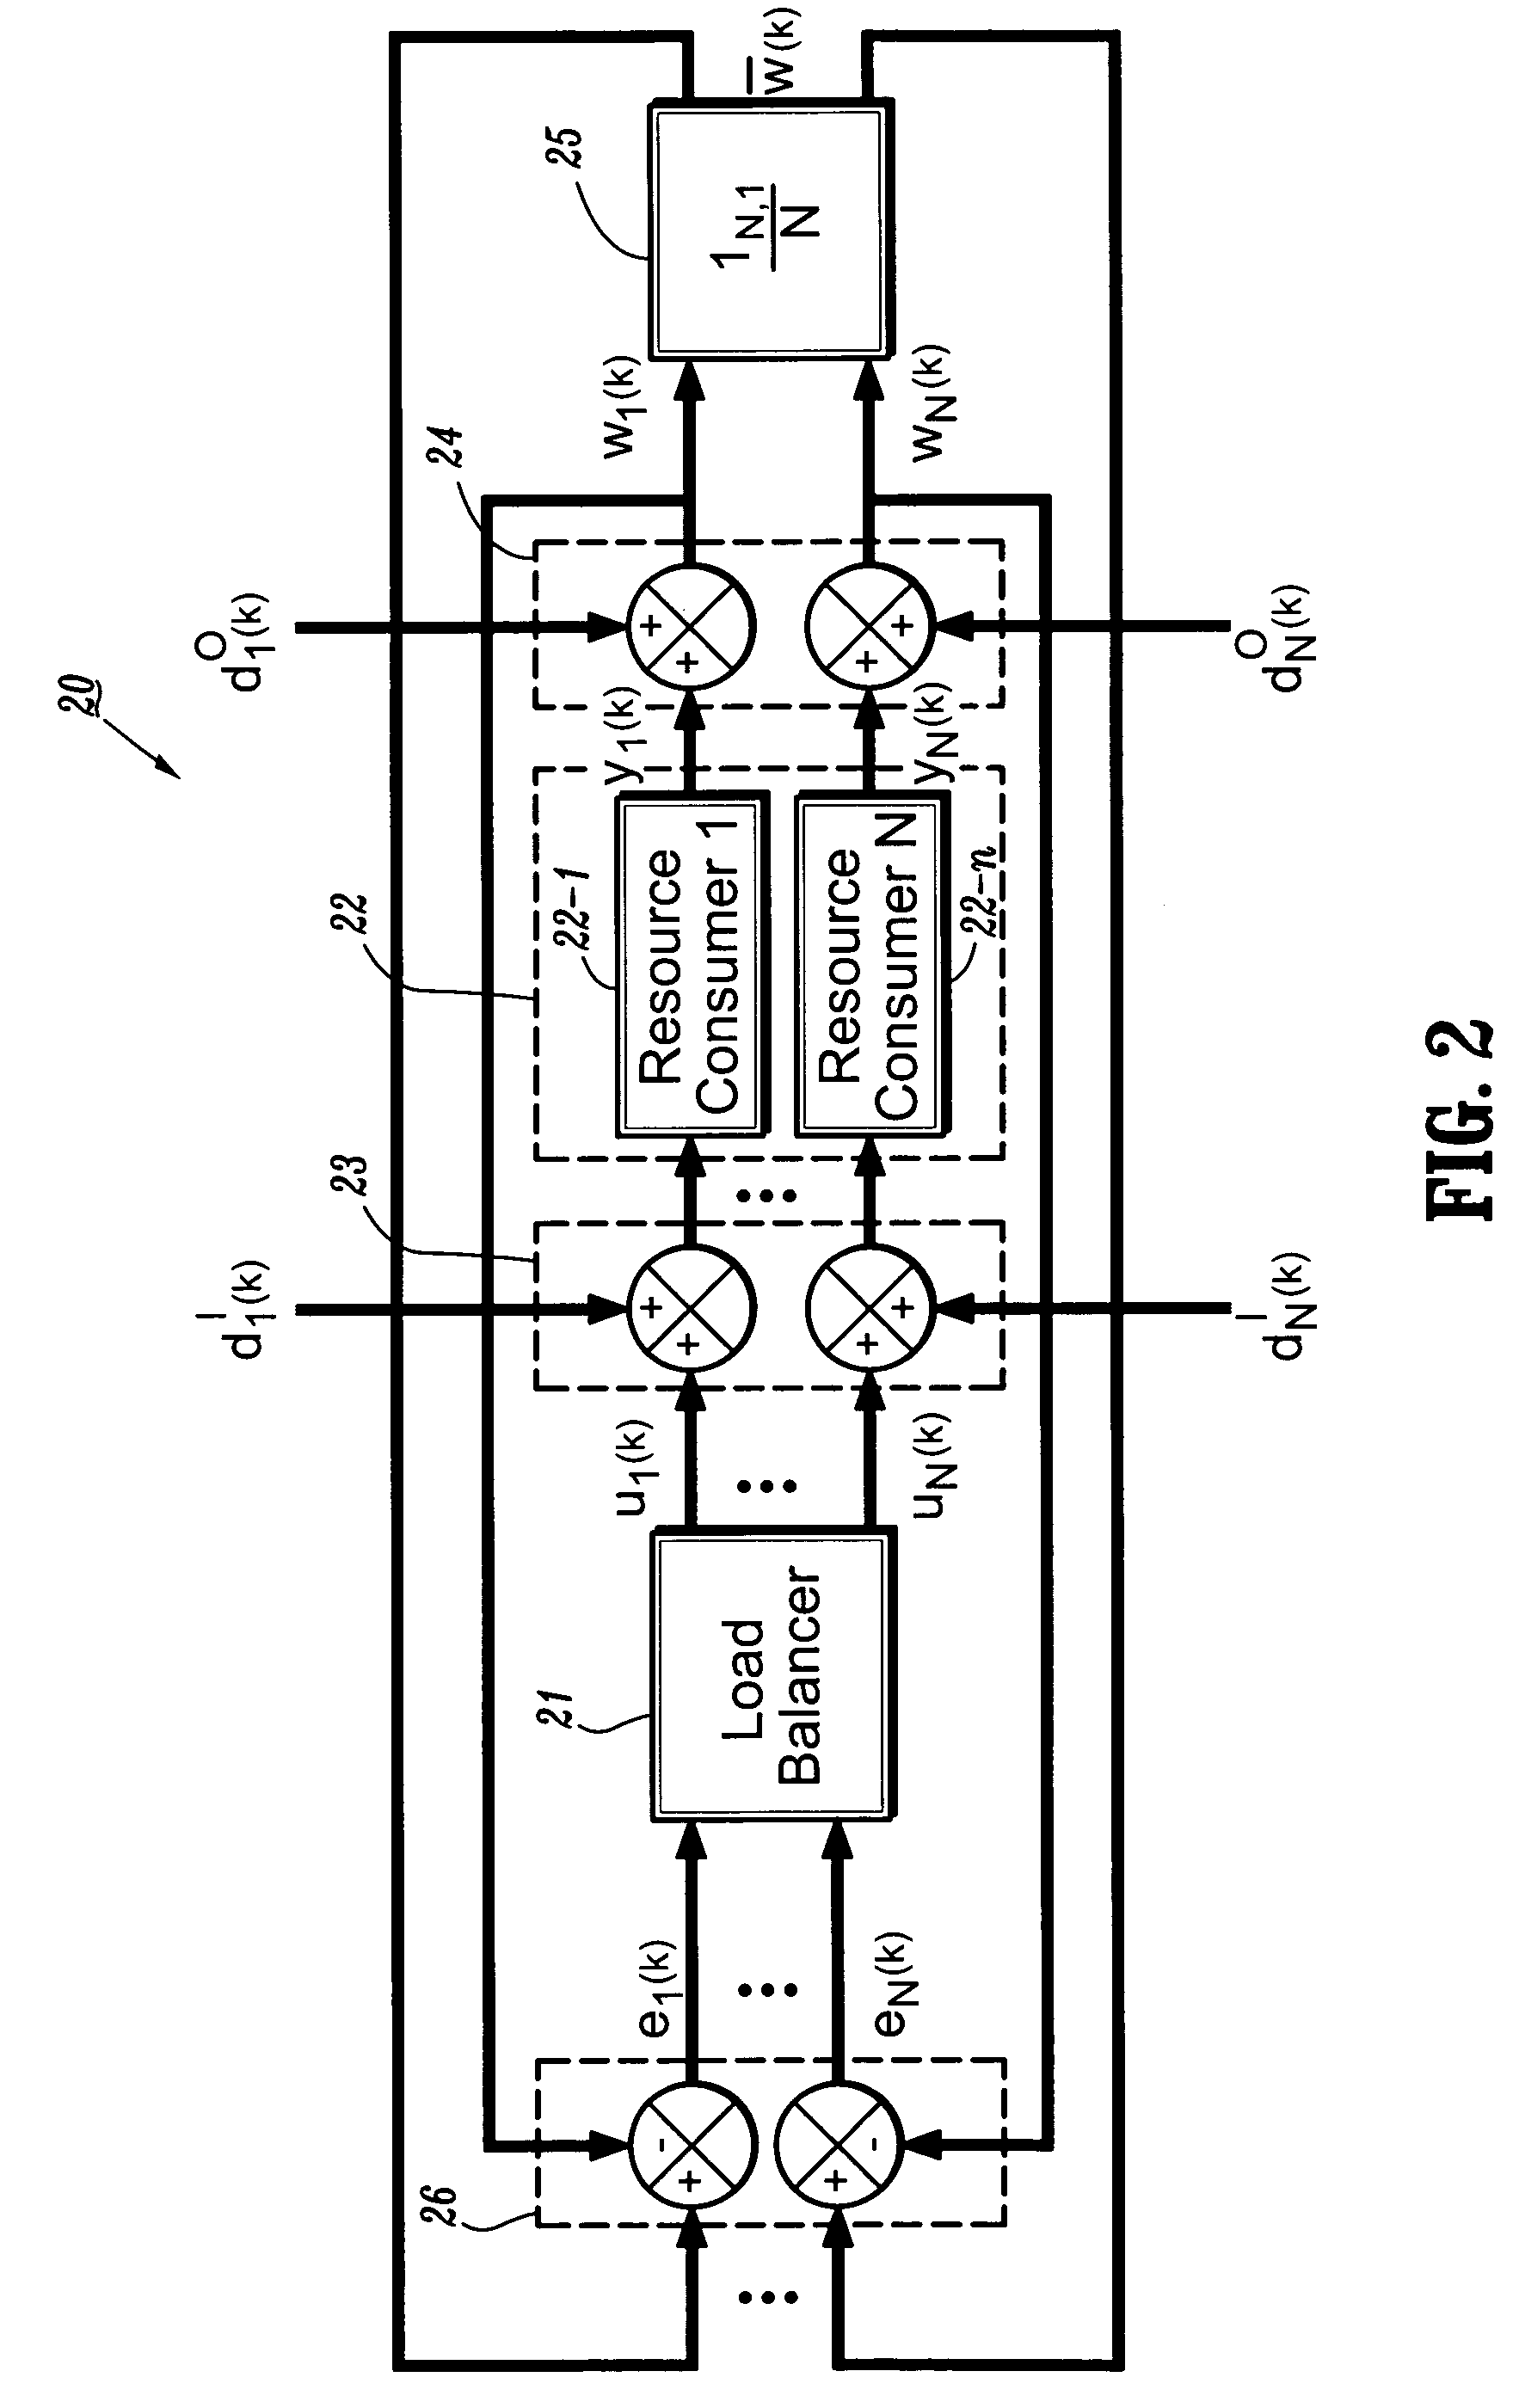 Systems and methods for providing constrained optimization using adaptive regulatory control